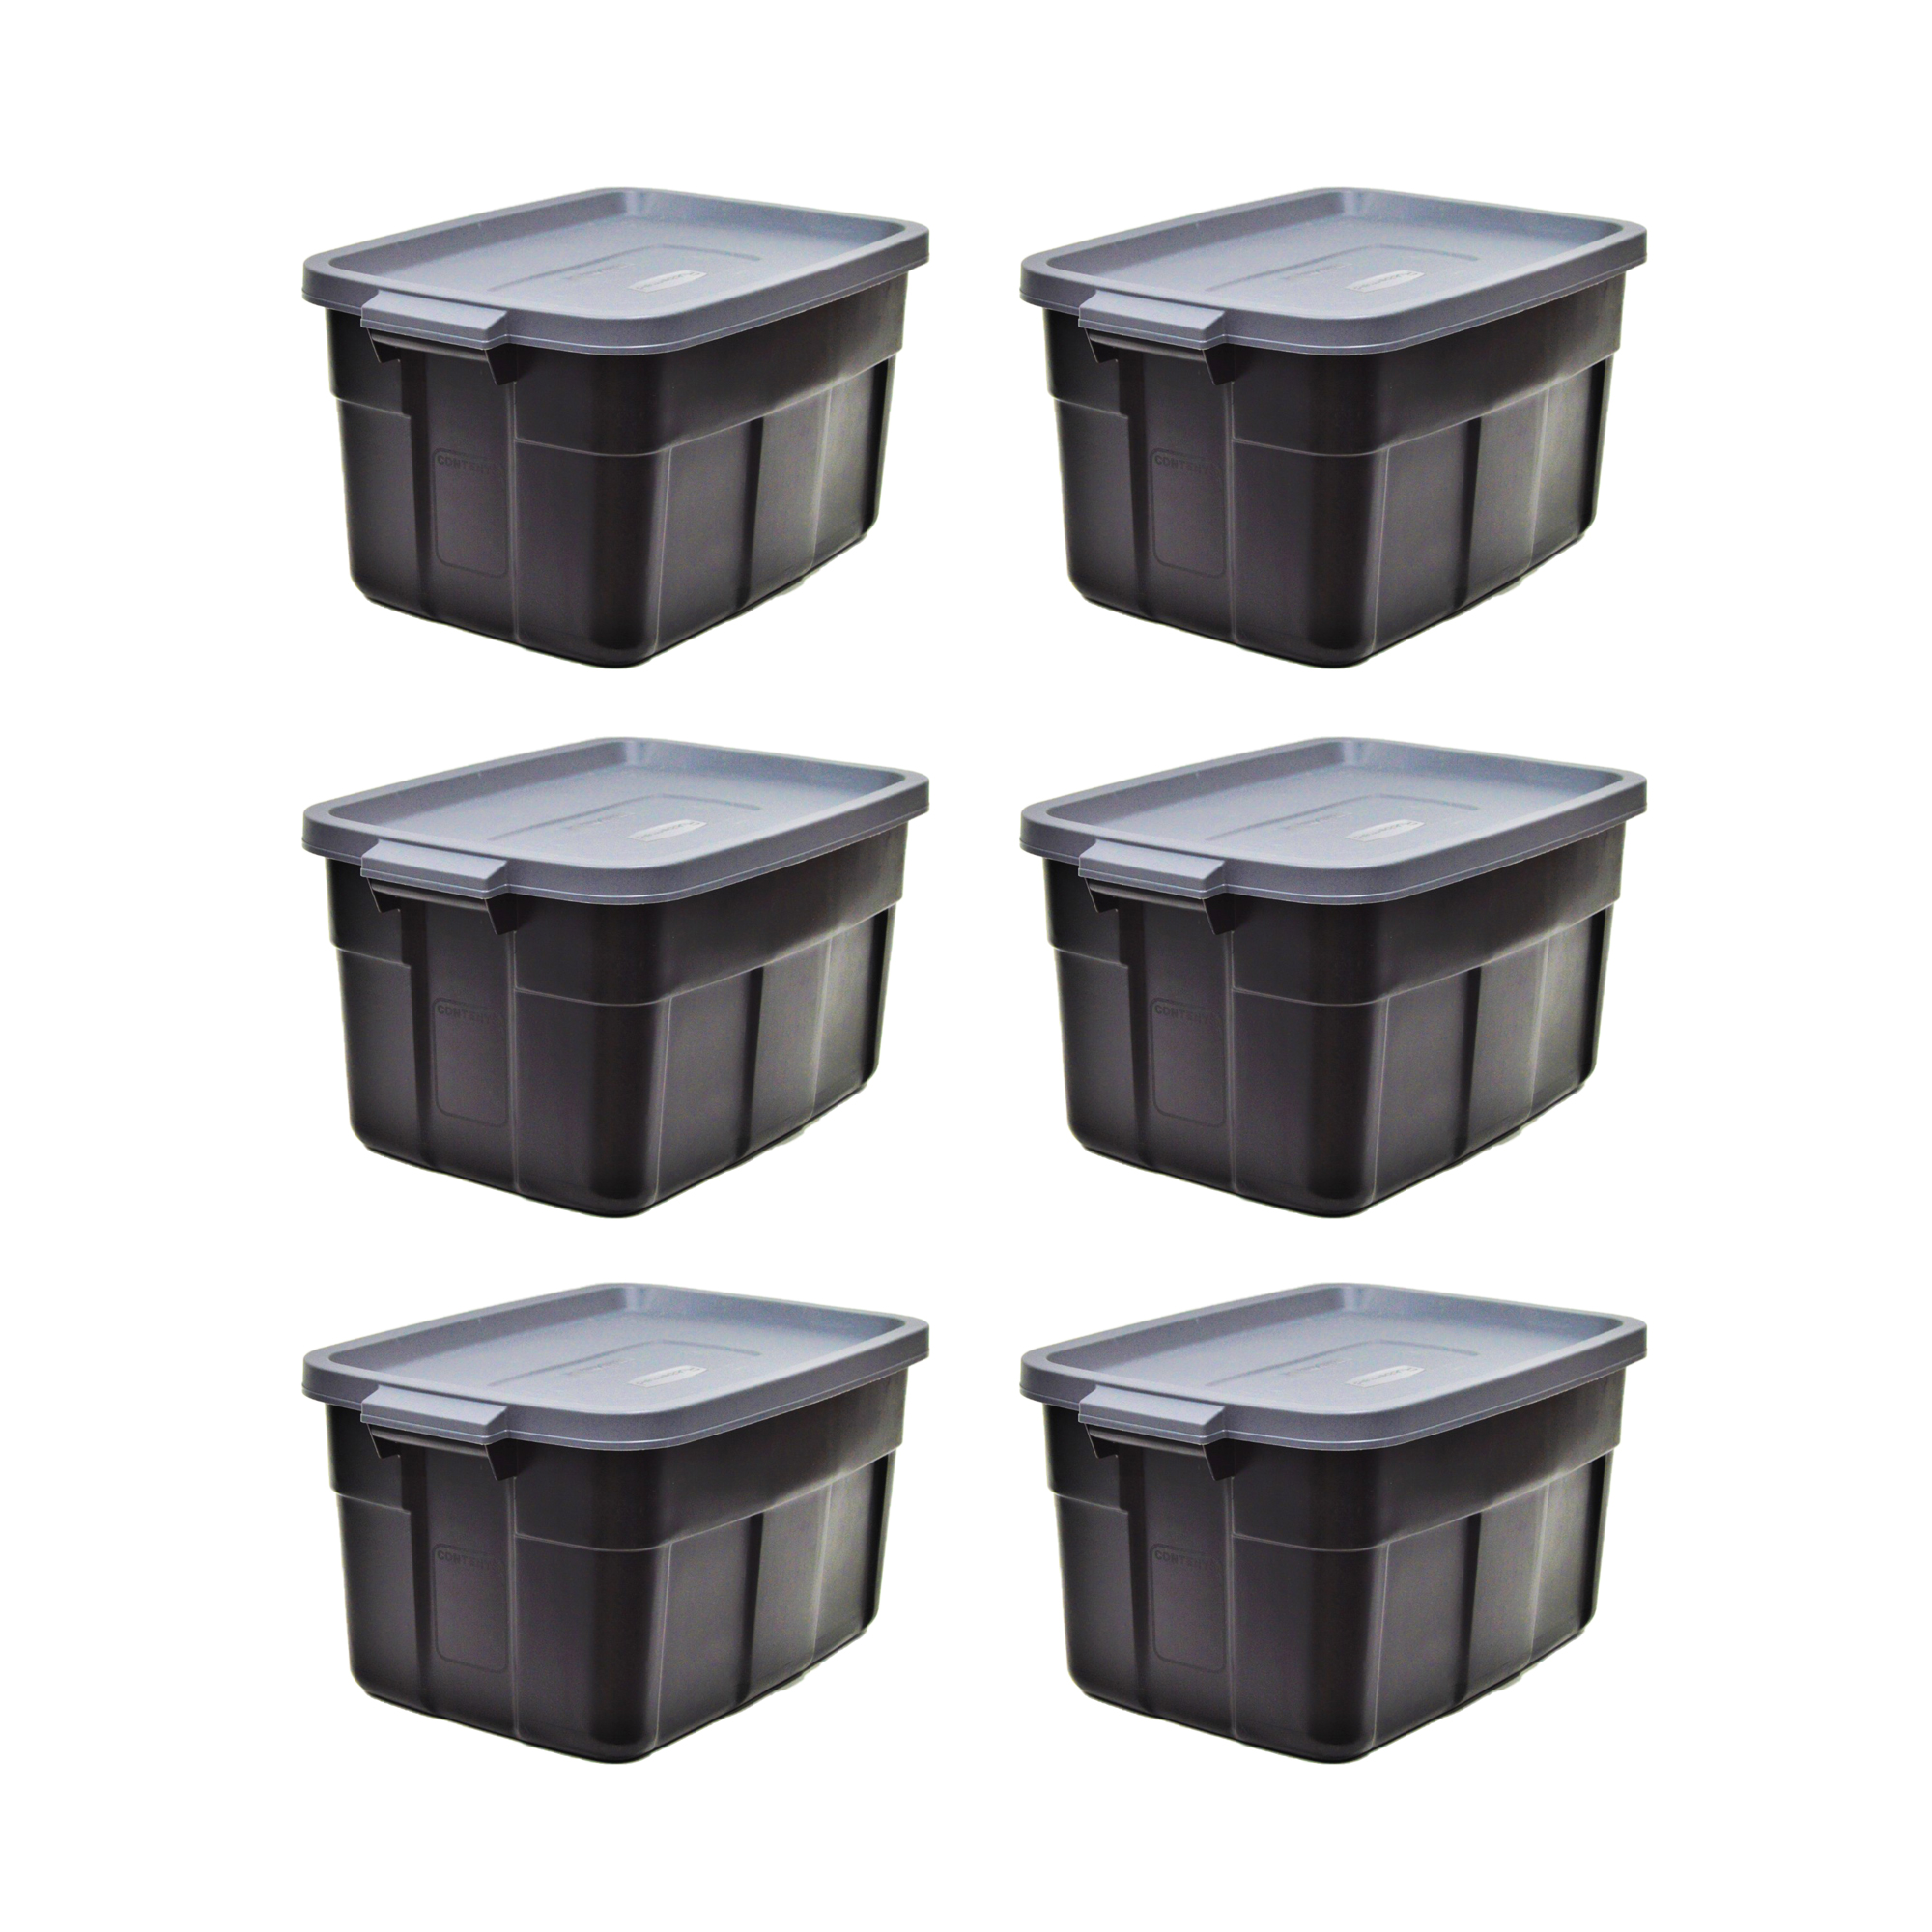 Rubbermaid Roughneck Tote 14 Gal Storage Container, Black/Cool Gray, 6 Pack - image 1 of 2